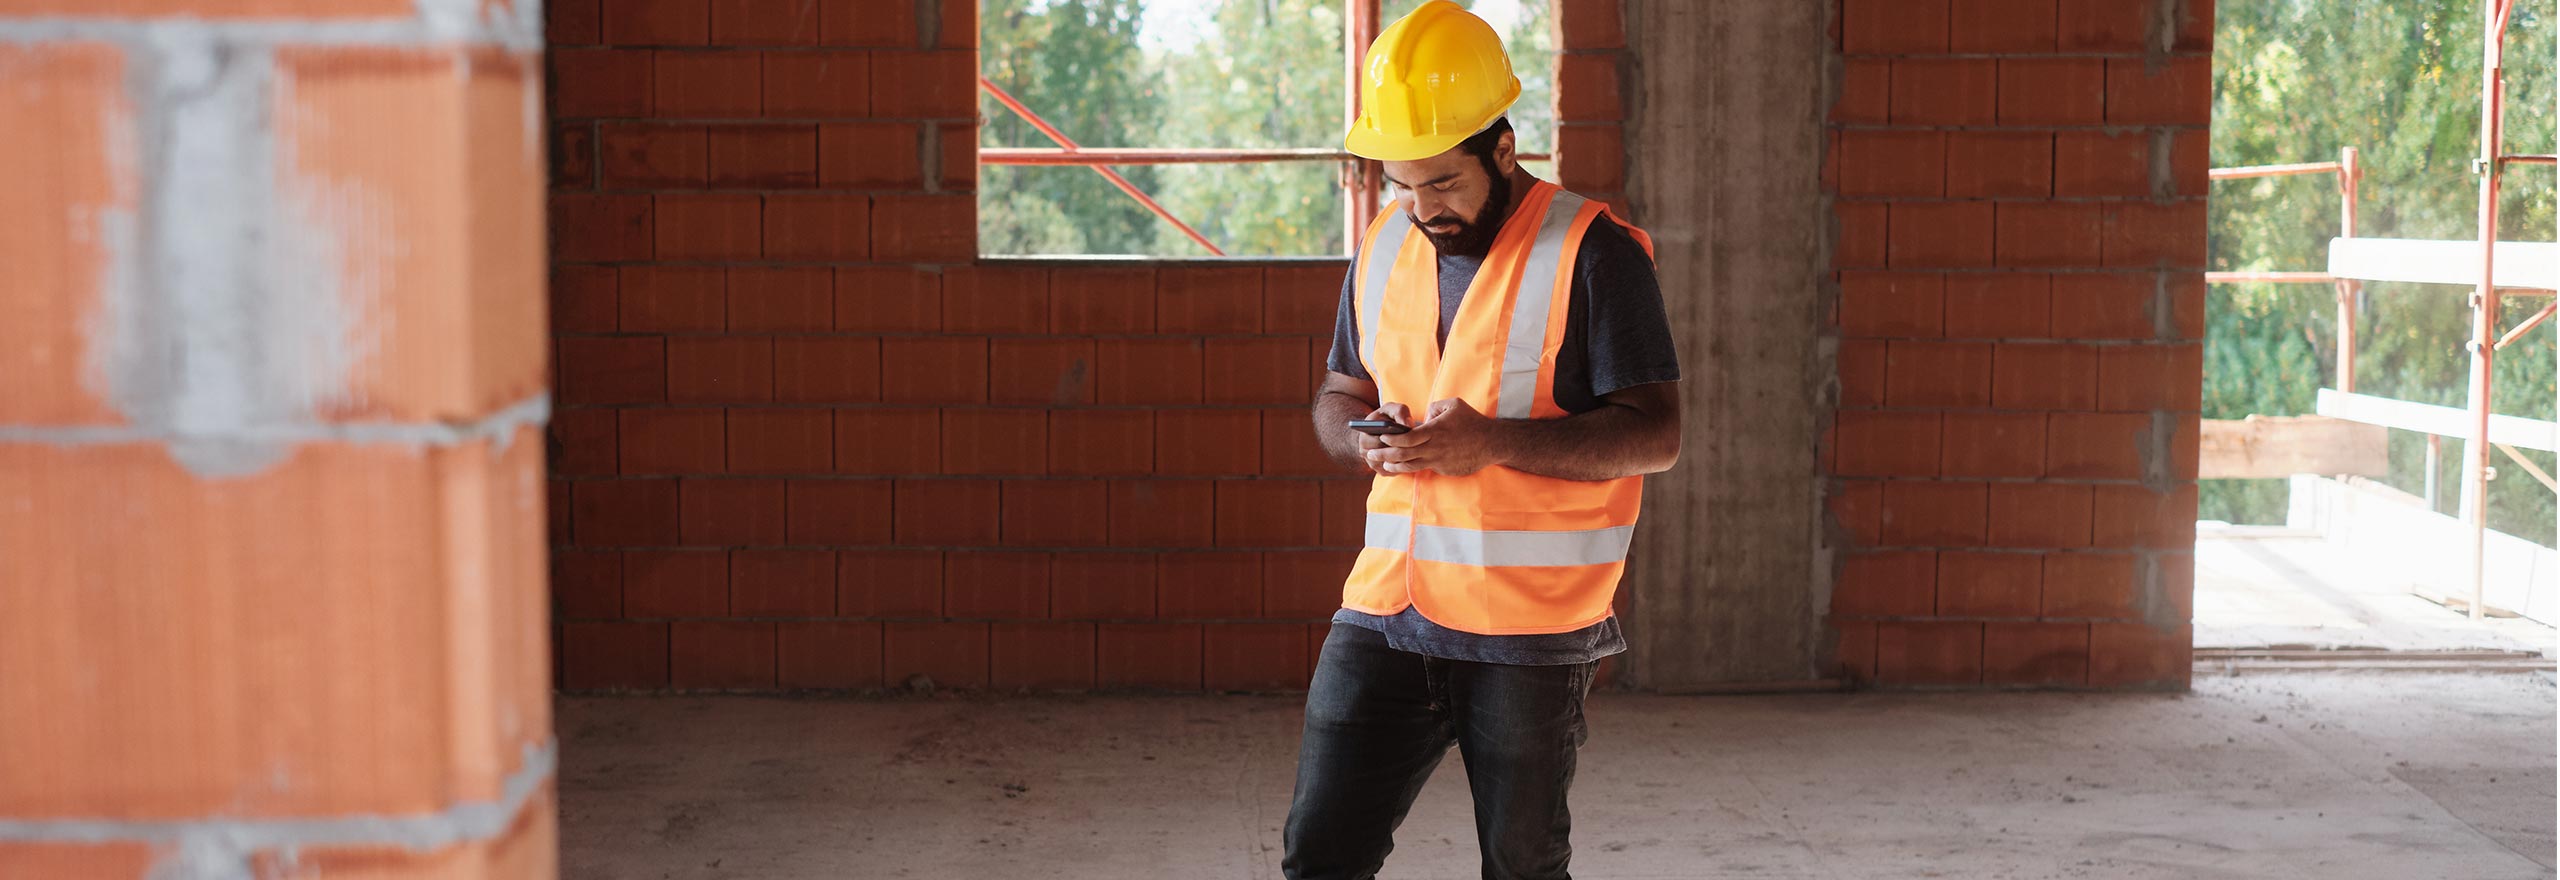 Man at work on construction site using a mobile device for message and communications about safety procedures